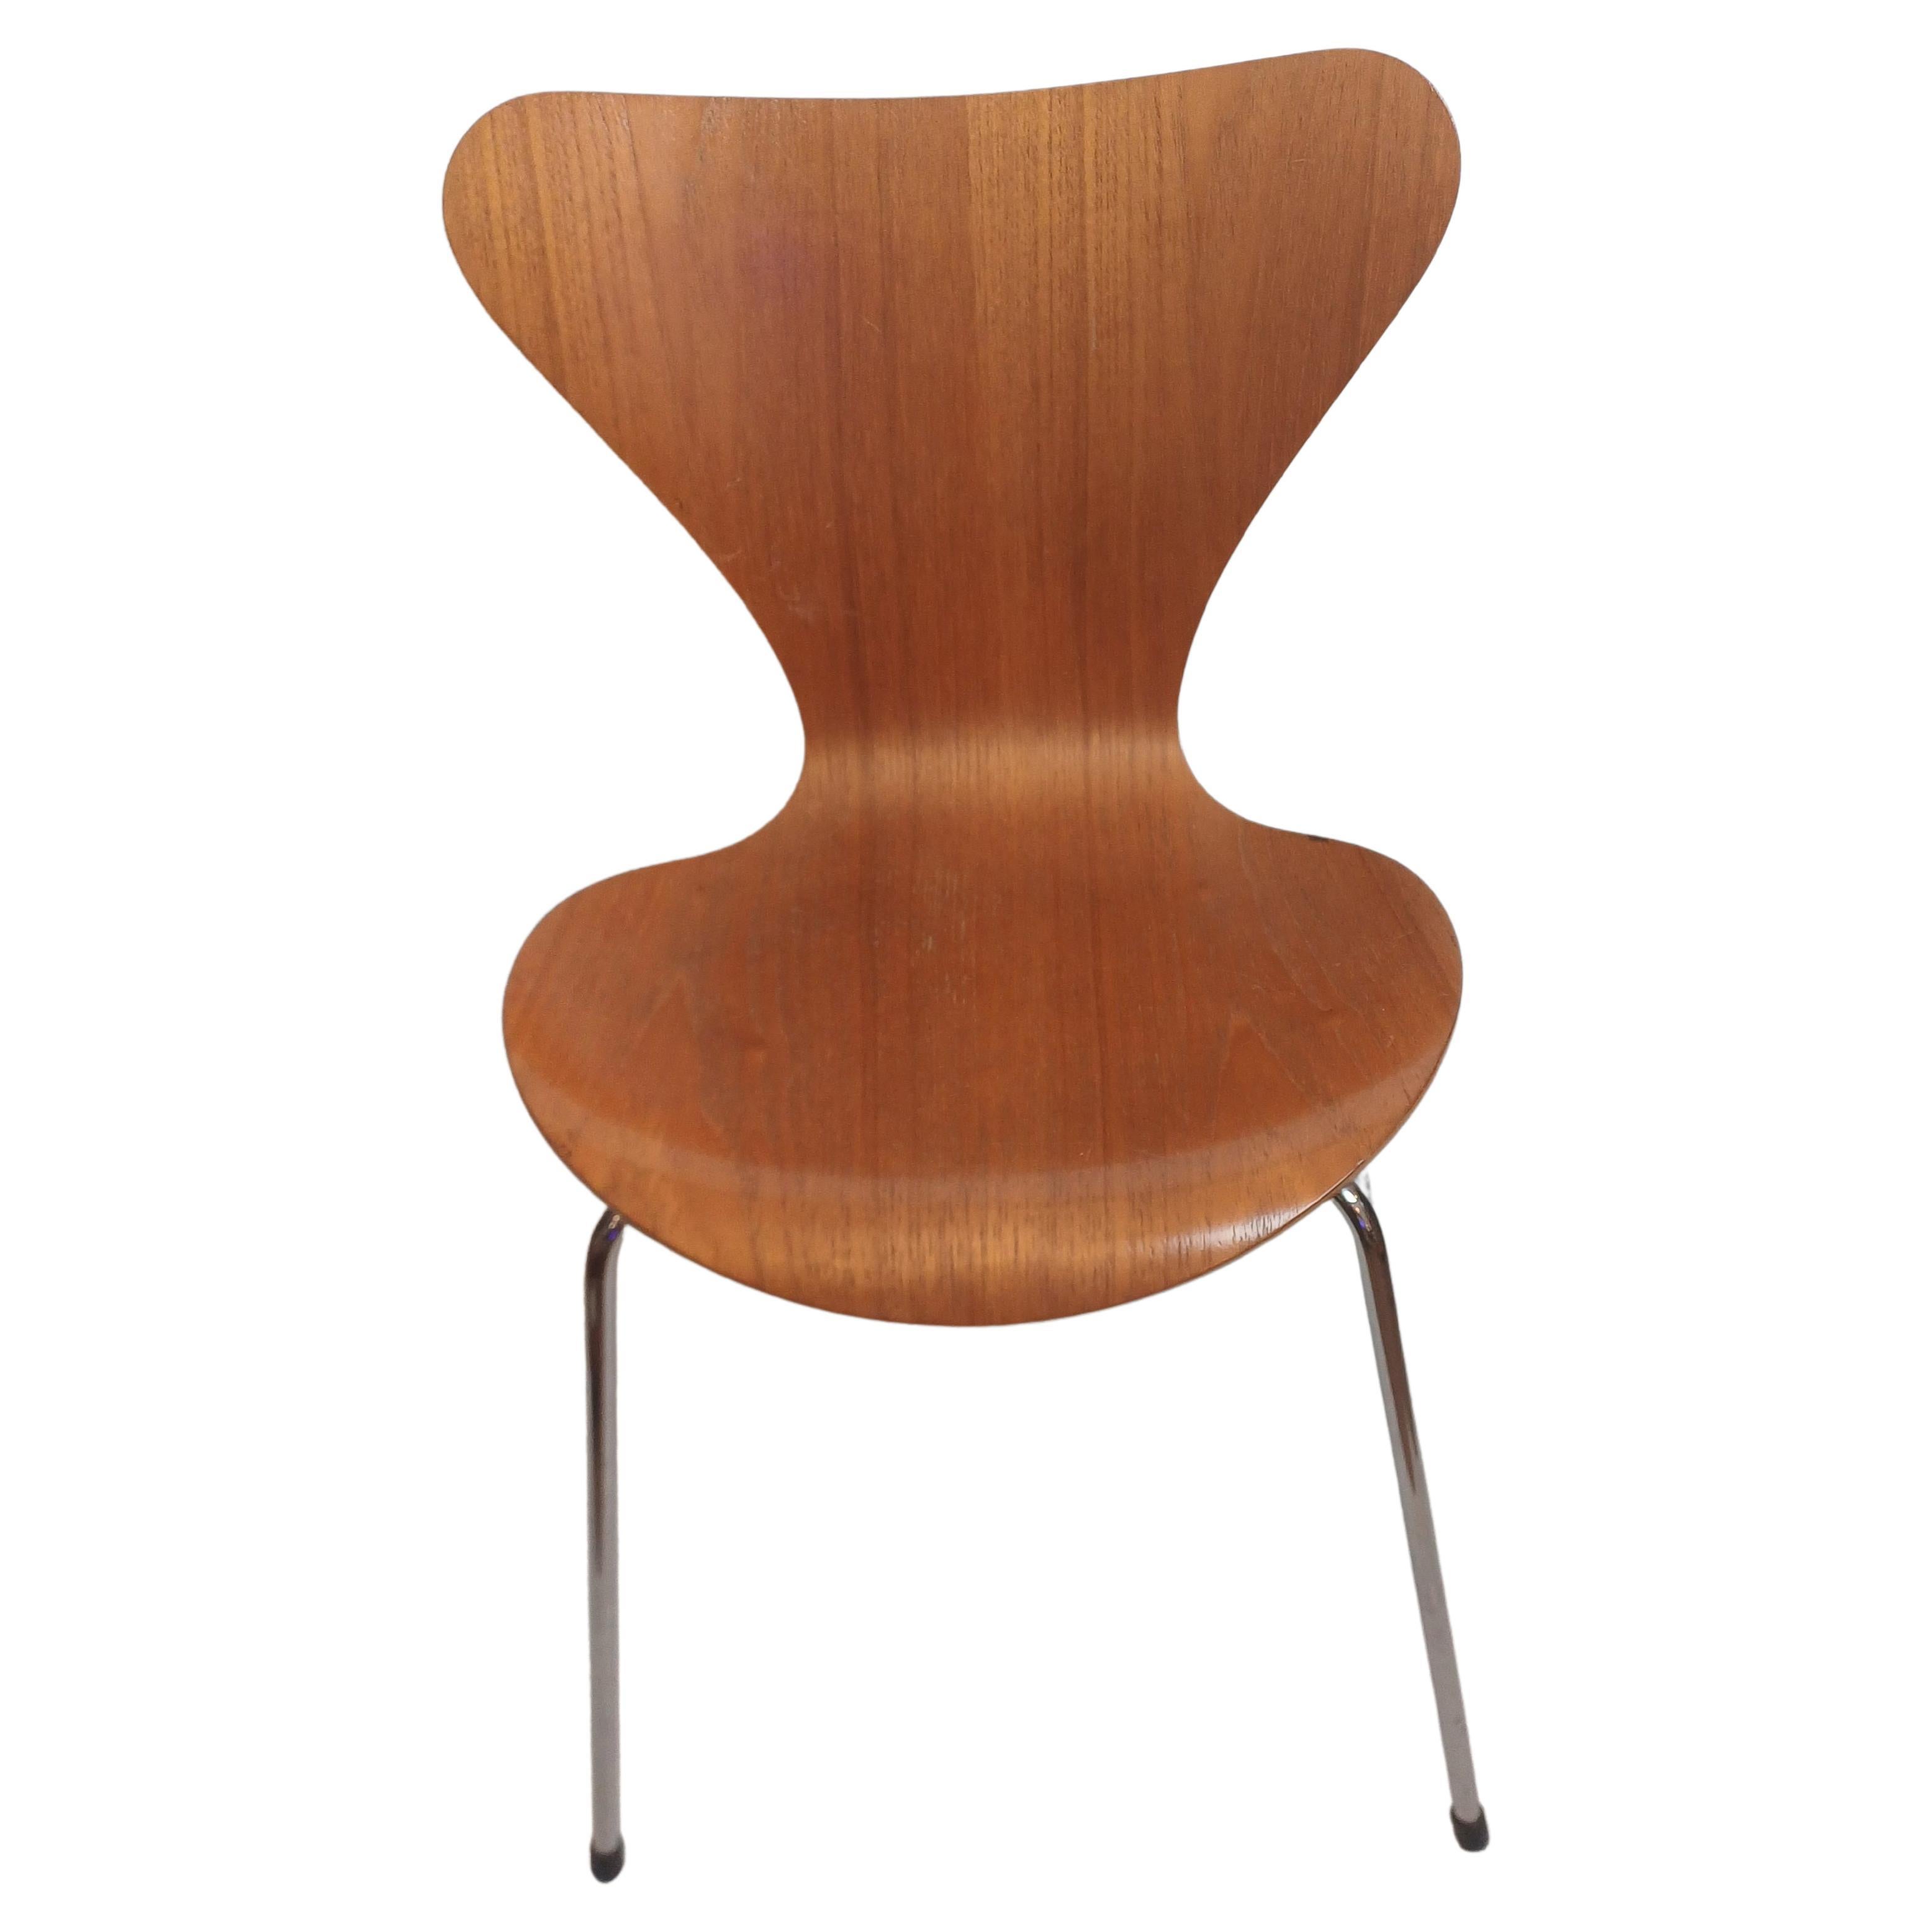 No. 1 SERIES 7 chair designed by Arne Jacobsen in 1955 and manufactured in Denmark by Fritz Hansen in 1992 (labeled). Bent plywood veneer frame, chrome-plated steel legs. In good condition, with some small traces of use as seen in the photos.